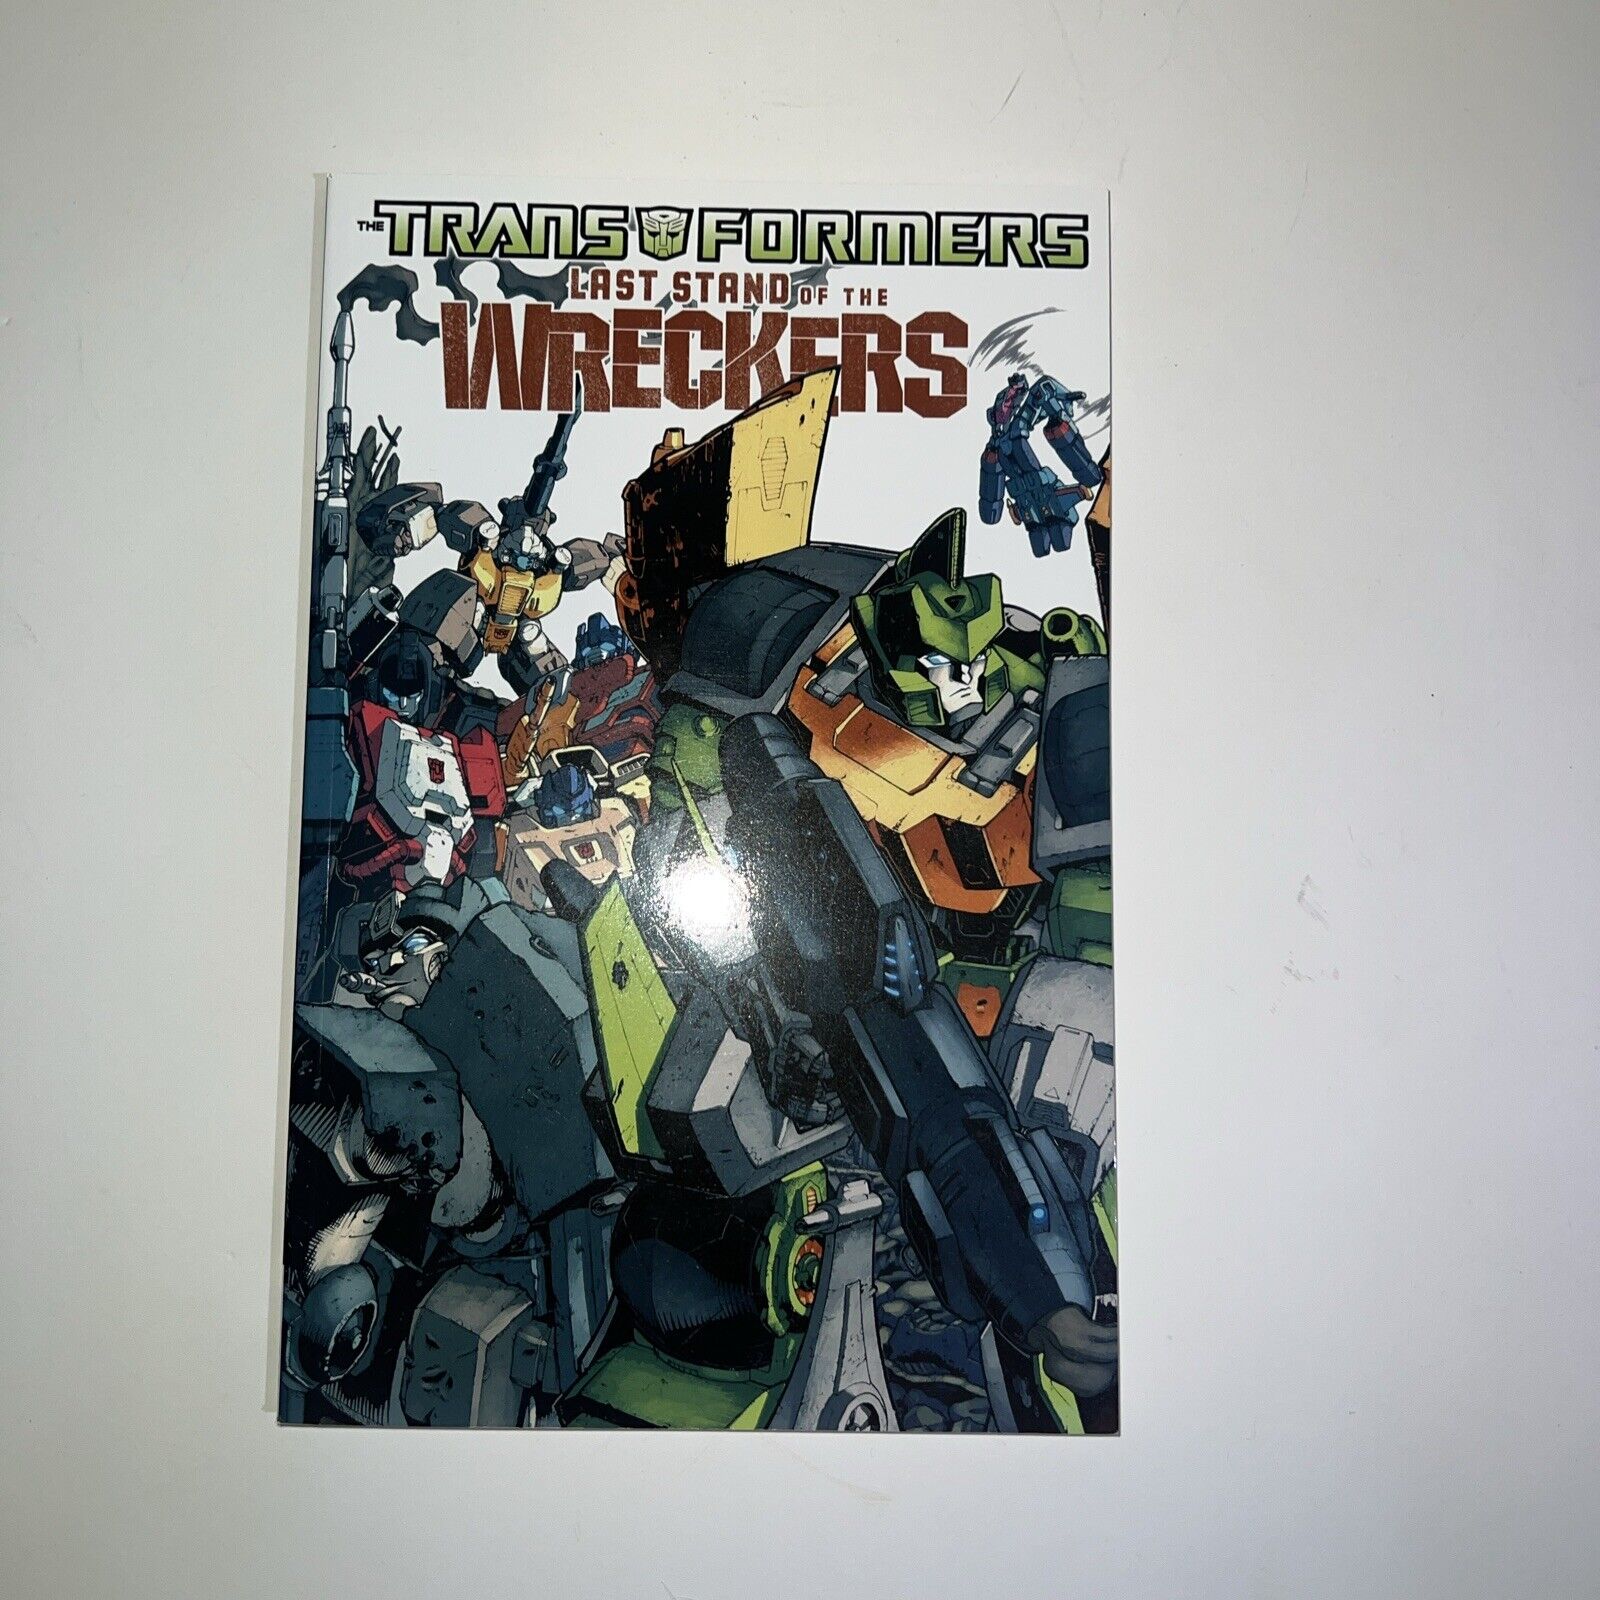 The Transformers: Last Stand of the Wreckers (IDW Publishing August 2010)